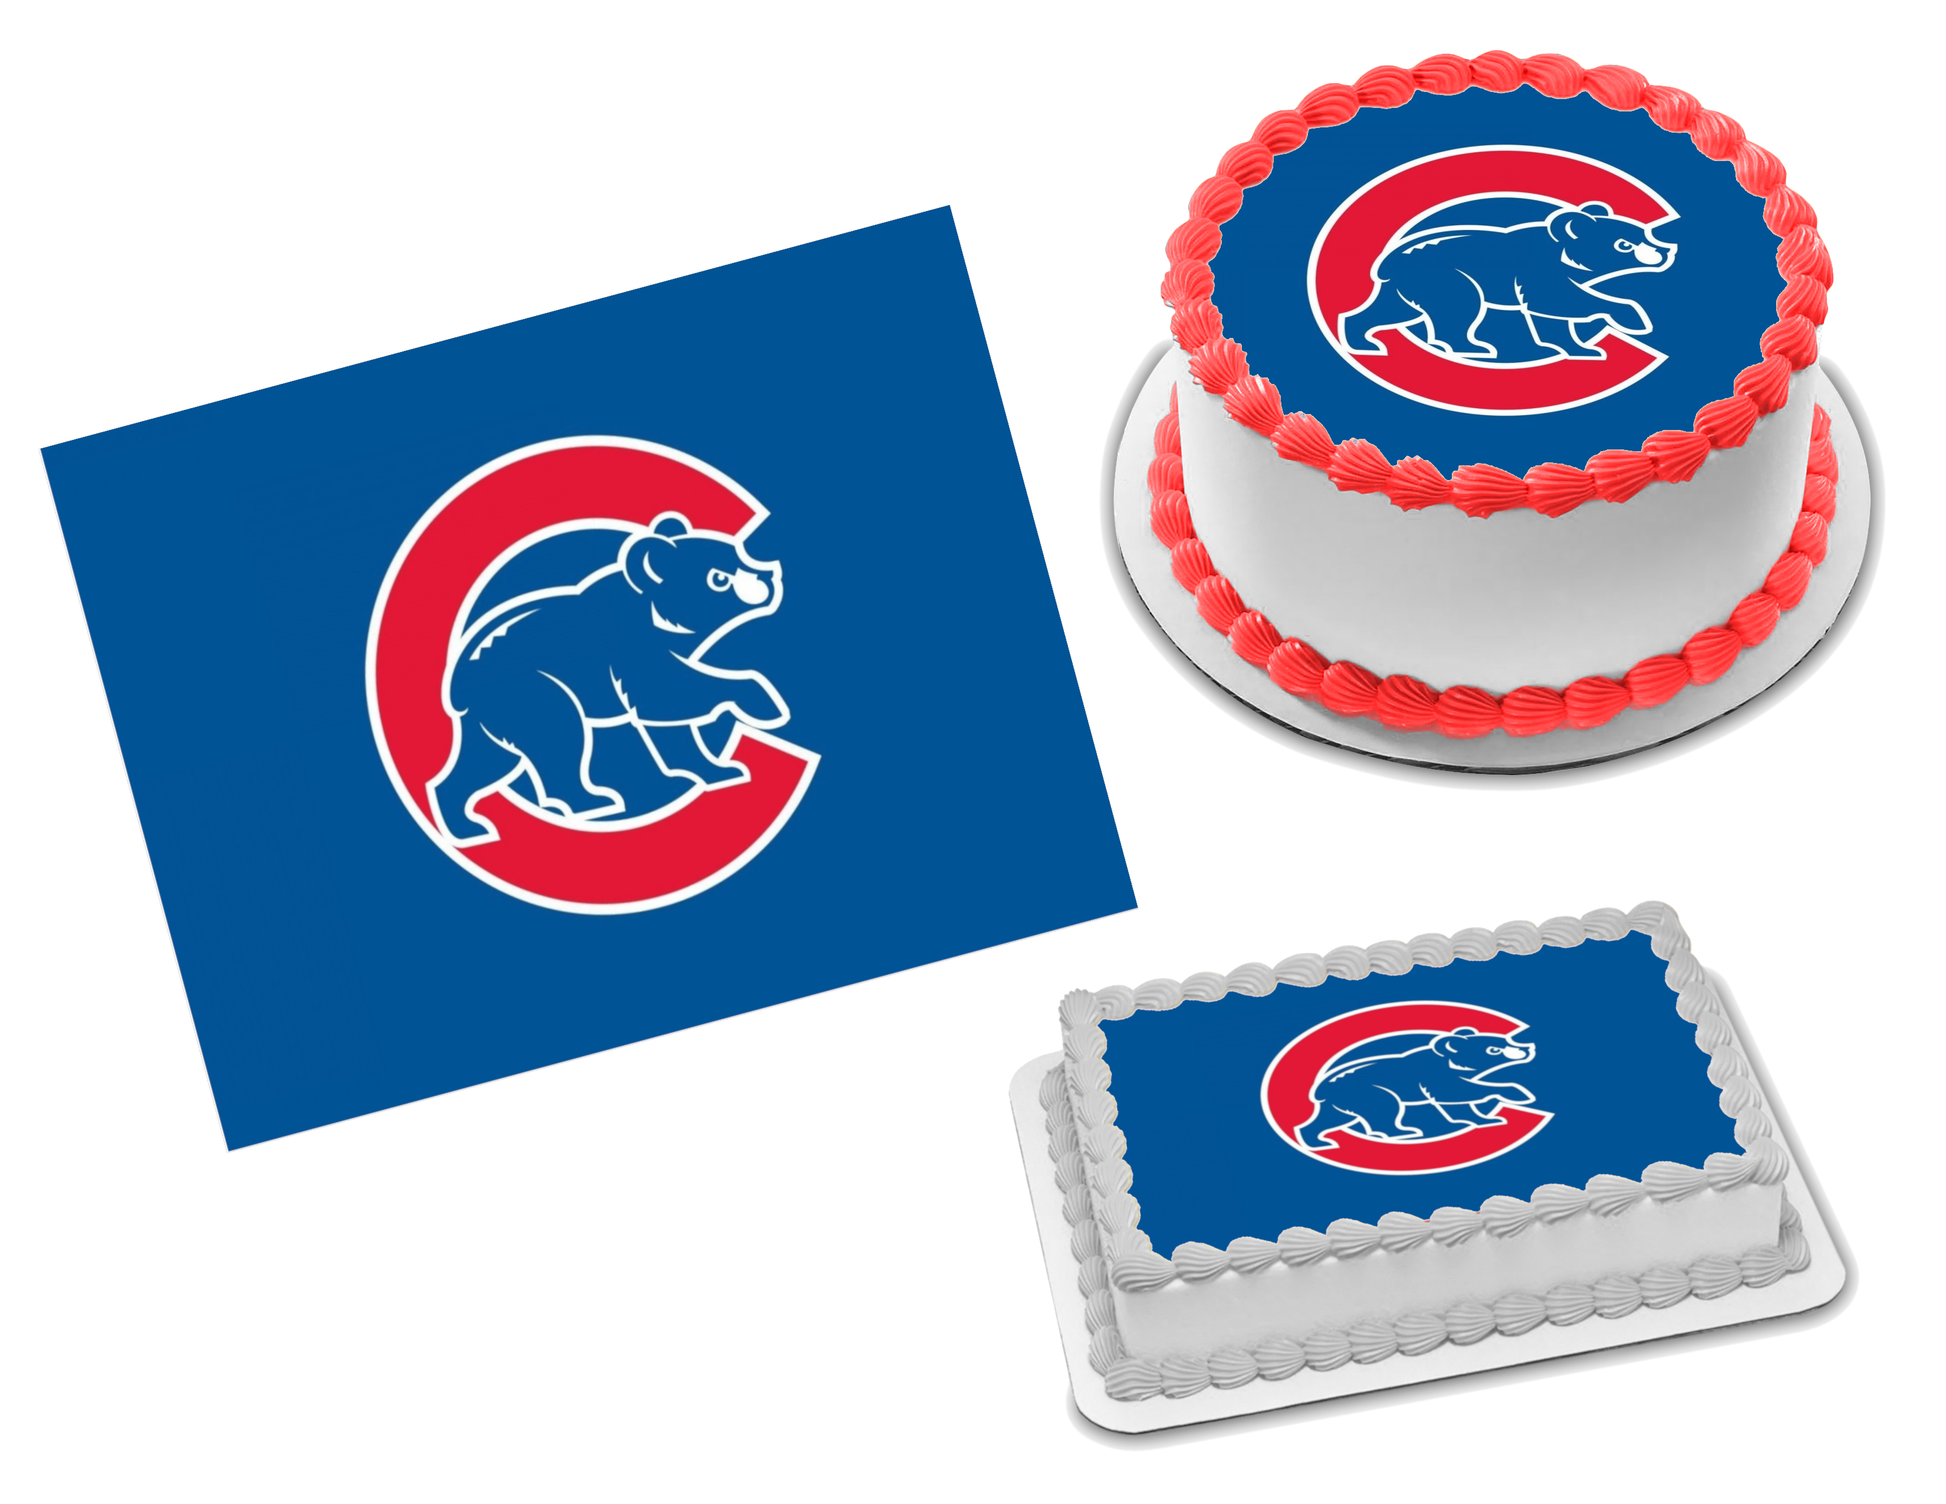 Chicago Cubs on X: Freshen up that lock screen